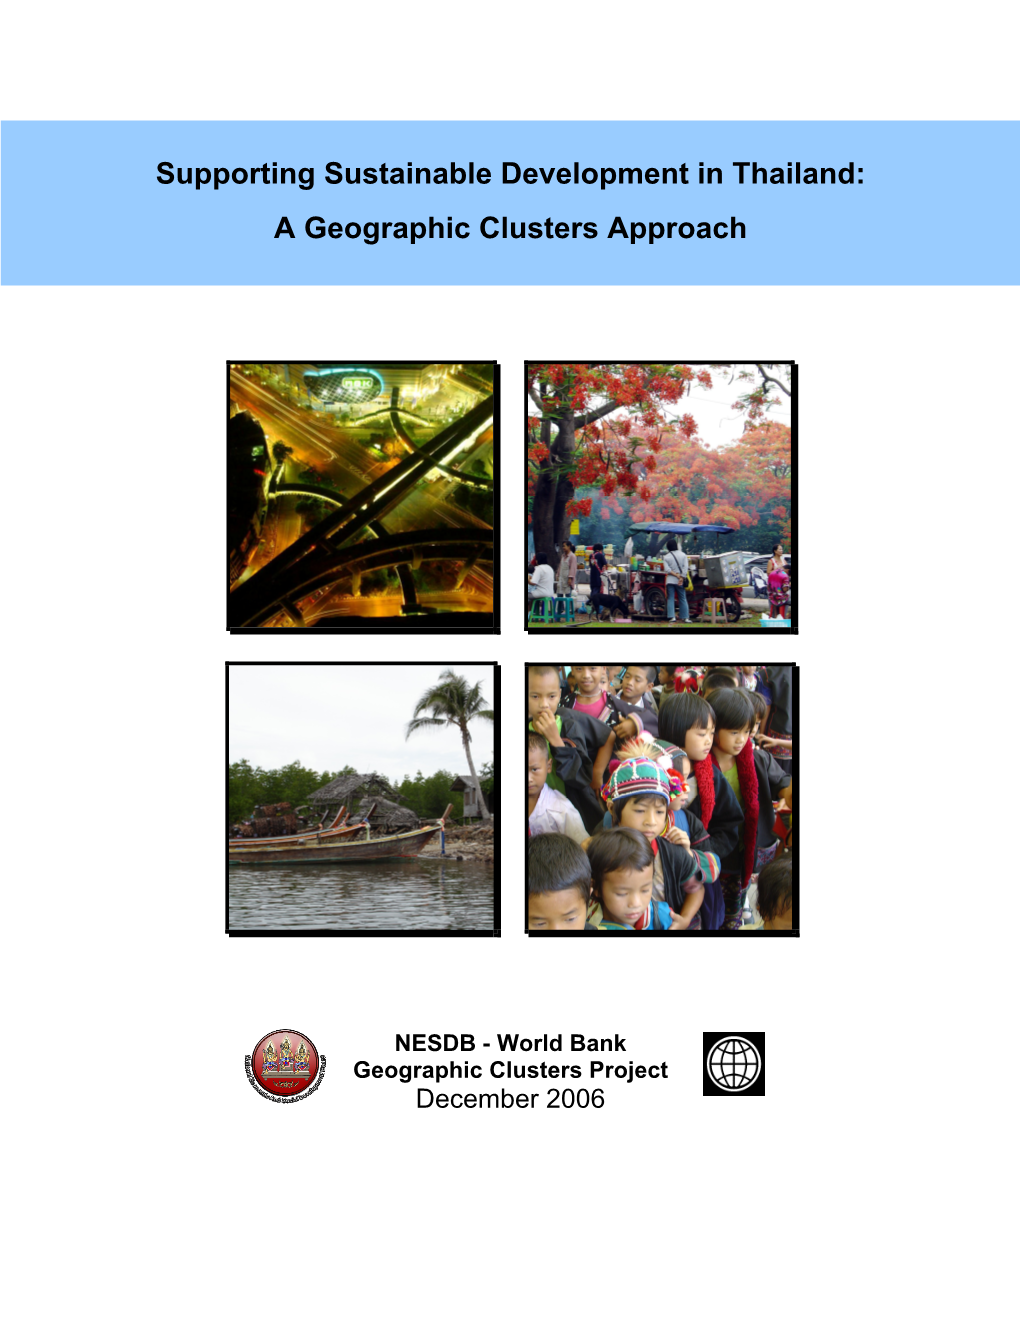 Supporting Sustainable Development in Thailand: a Geographic Clusters Approach